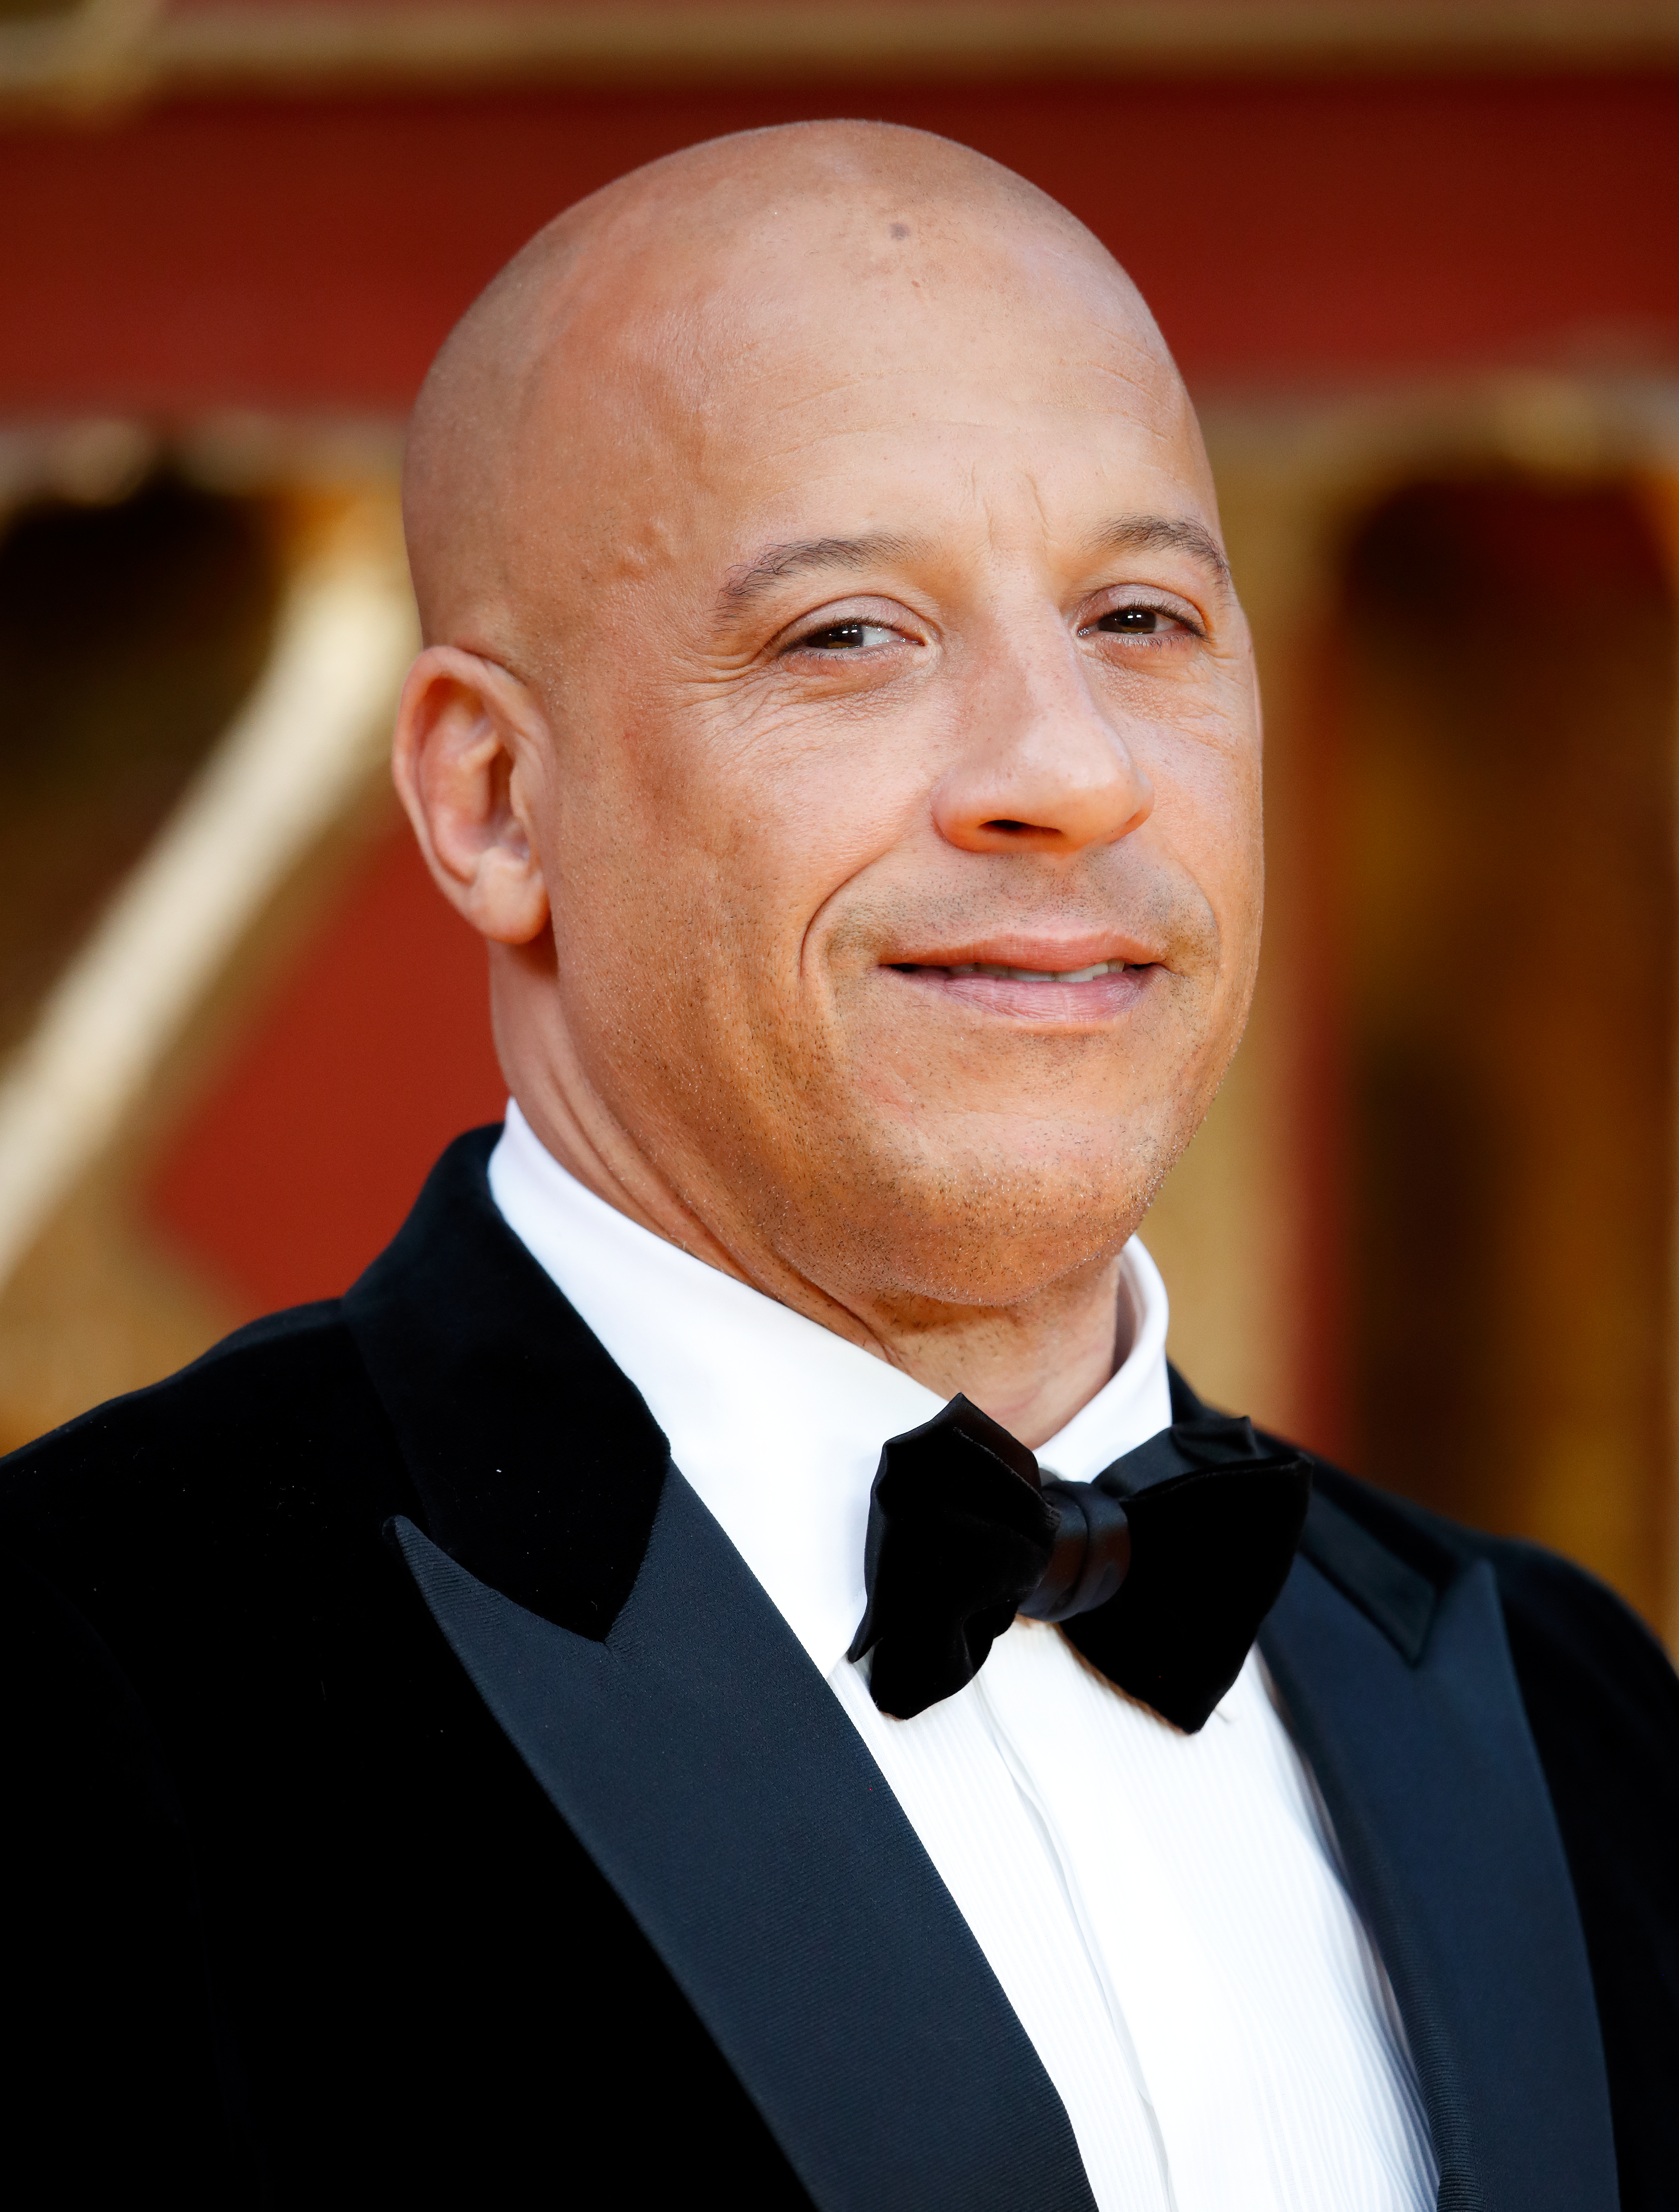 Vin Diesel at "The Lion King" premiere on July 14, 2019 | Source: Getty Images